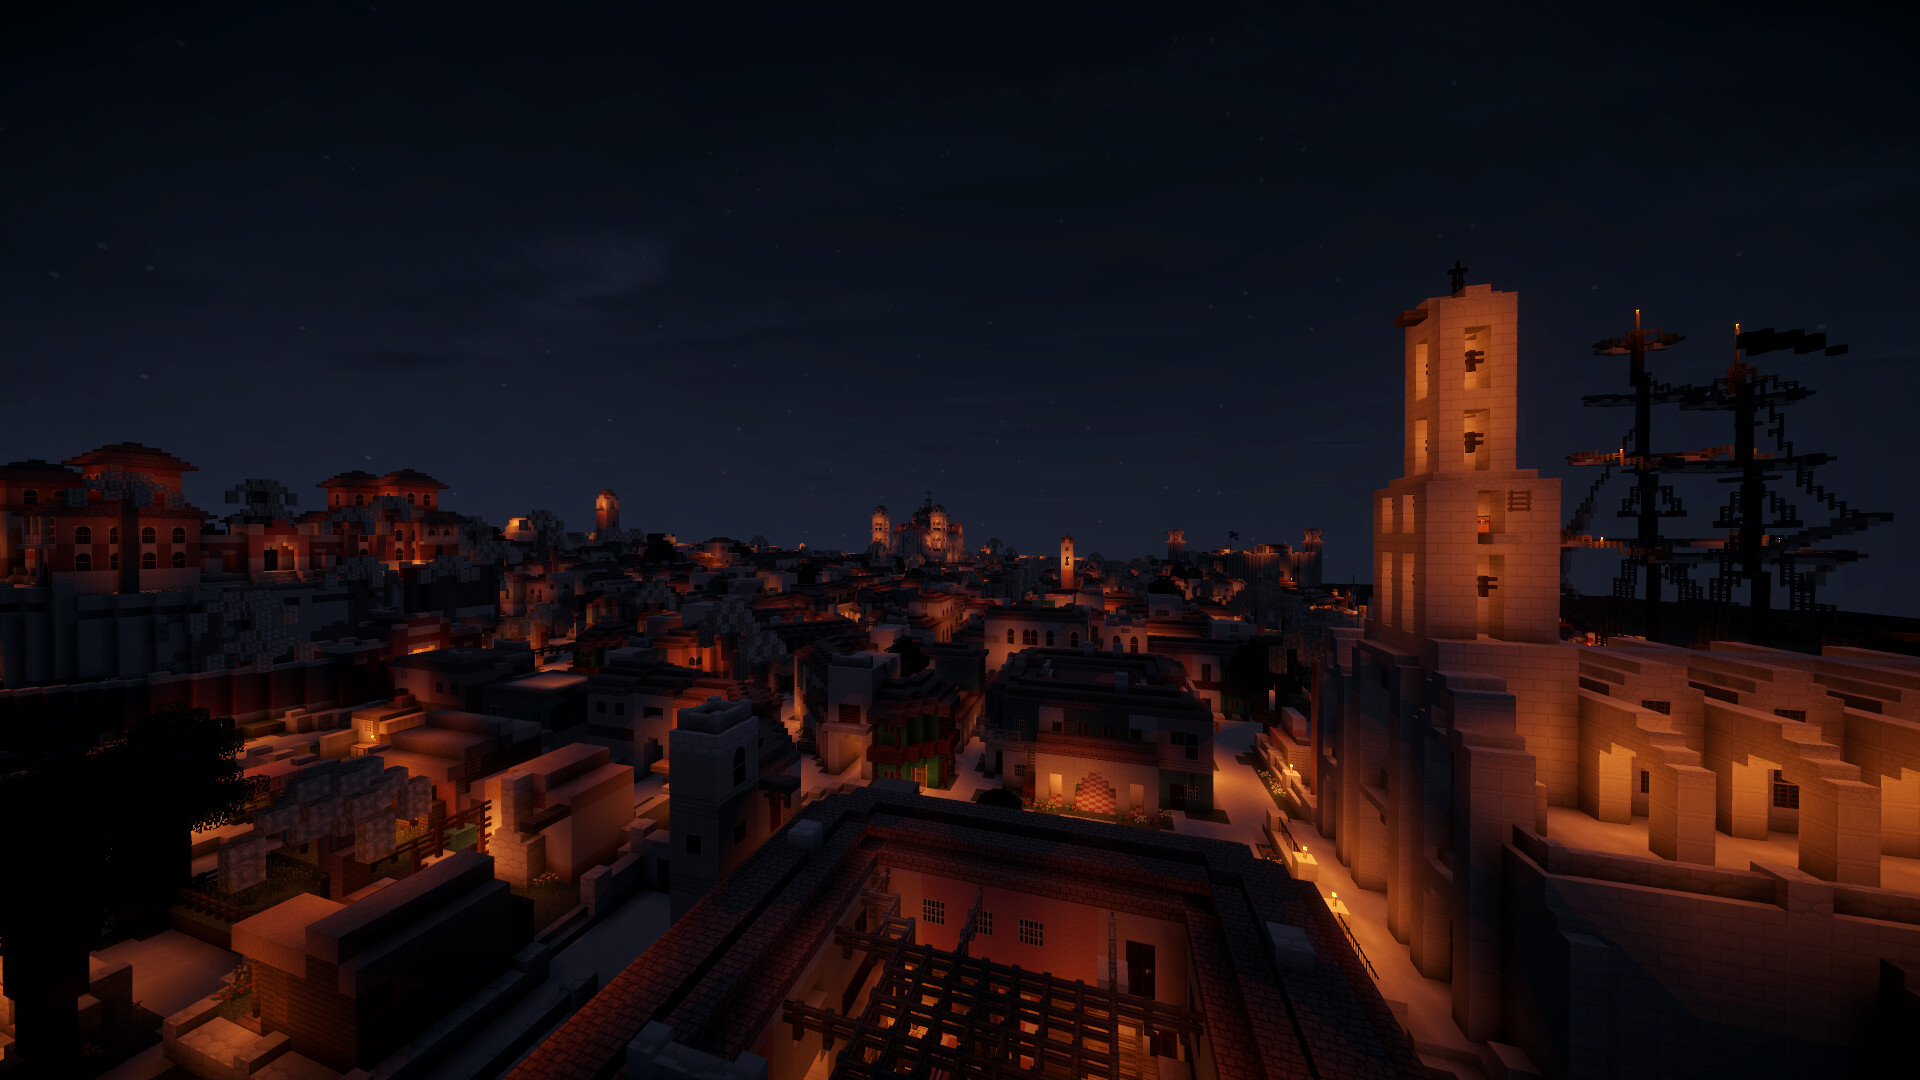 Havana From Assassin’s Creed IV, Recreated In Minecraft